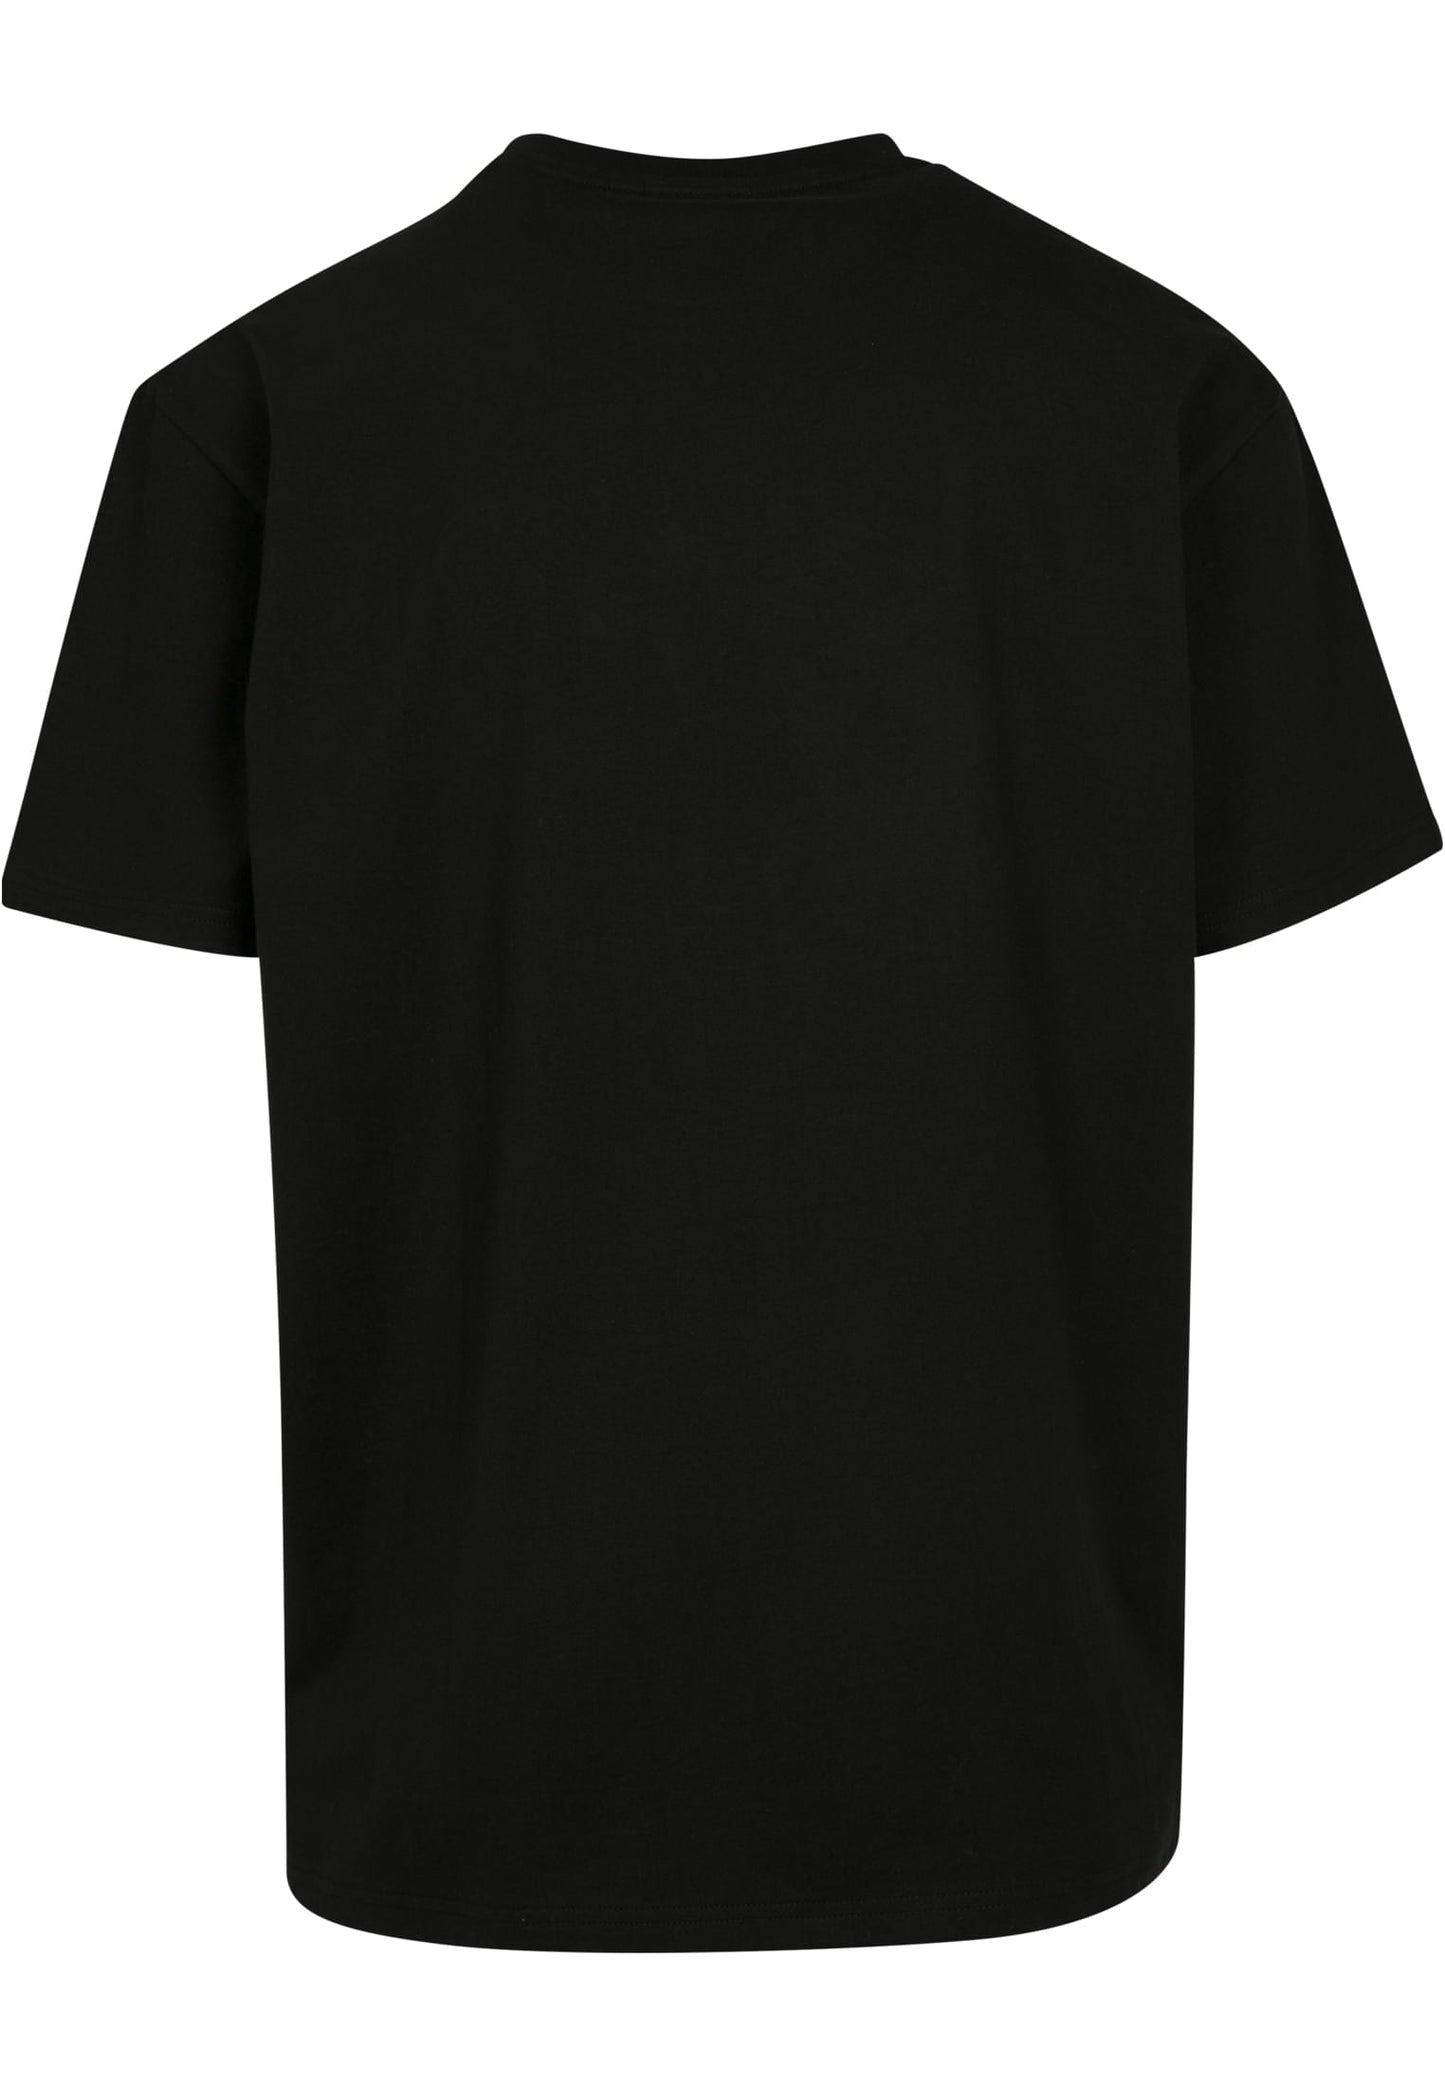 Upscale Studios Up to the Sky Oversize T-Shirt black im BAWRZ® One Stop Hip-Hop Shop